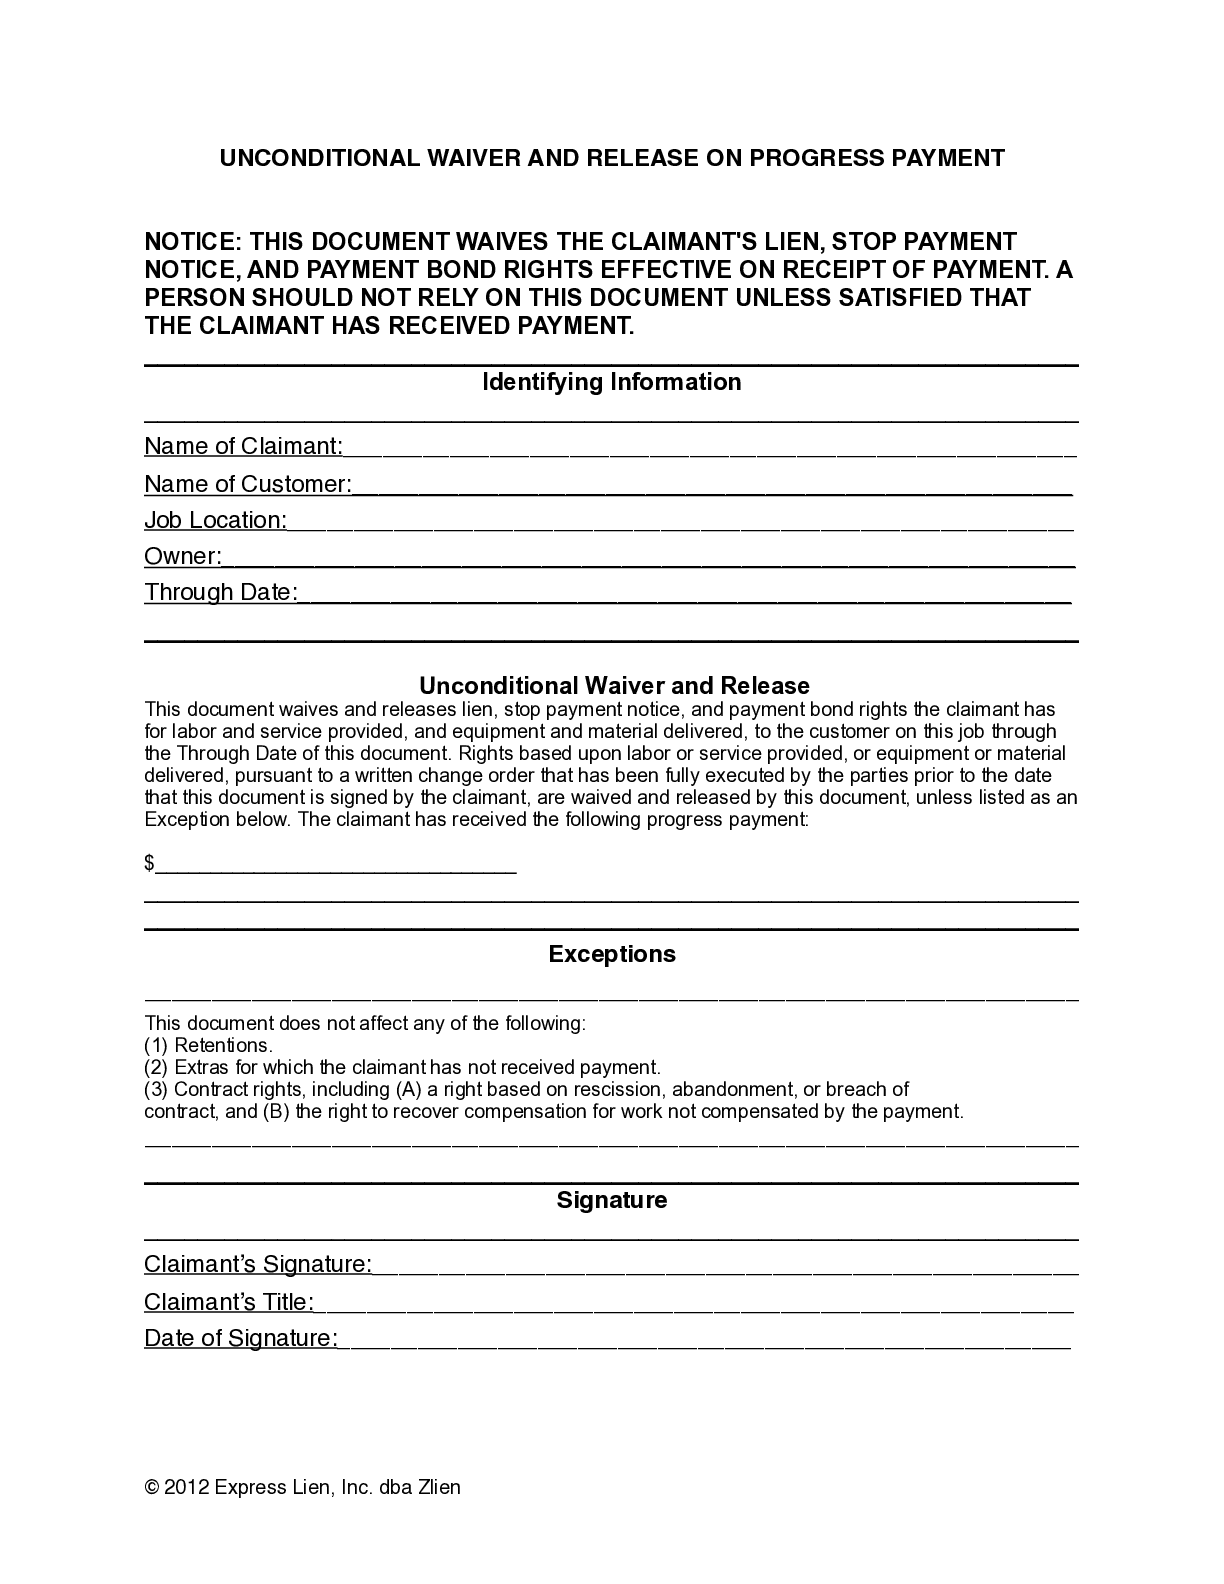 Rhode Island Partial Unconditional Lien Waiver Form - free from